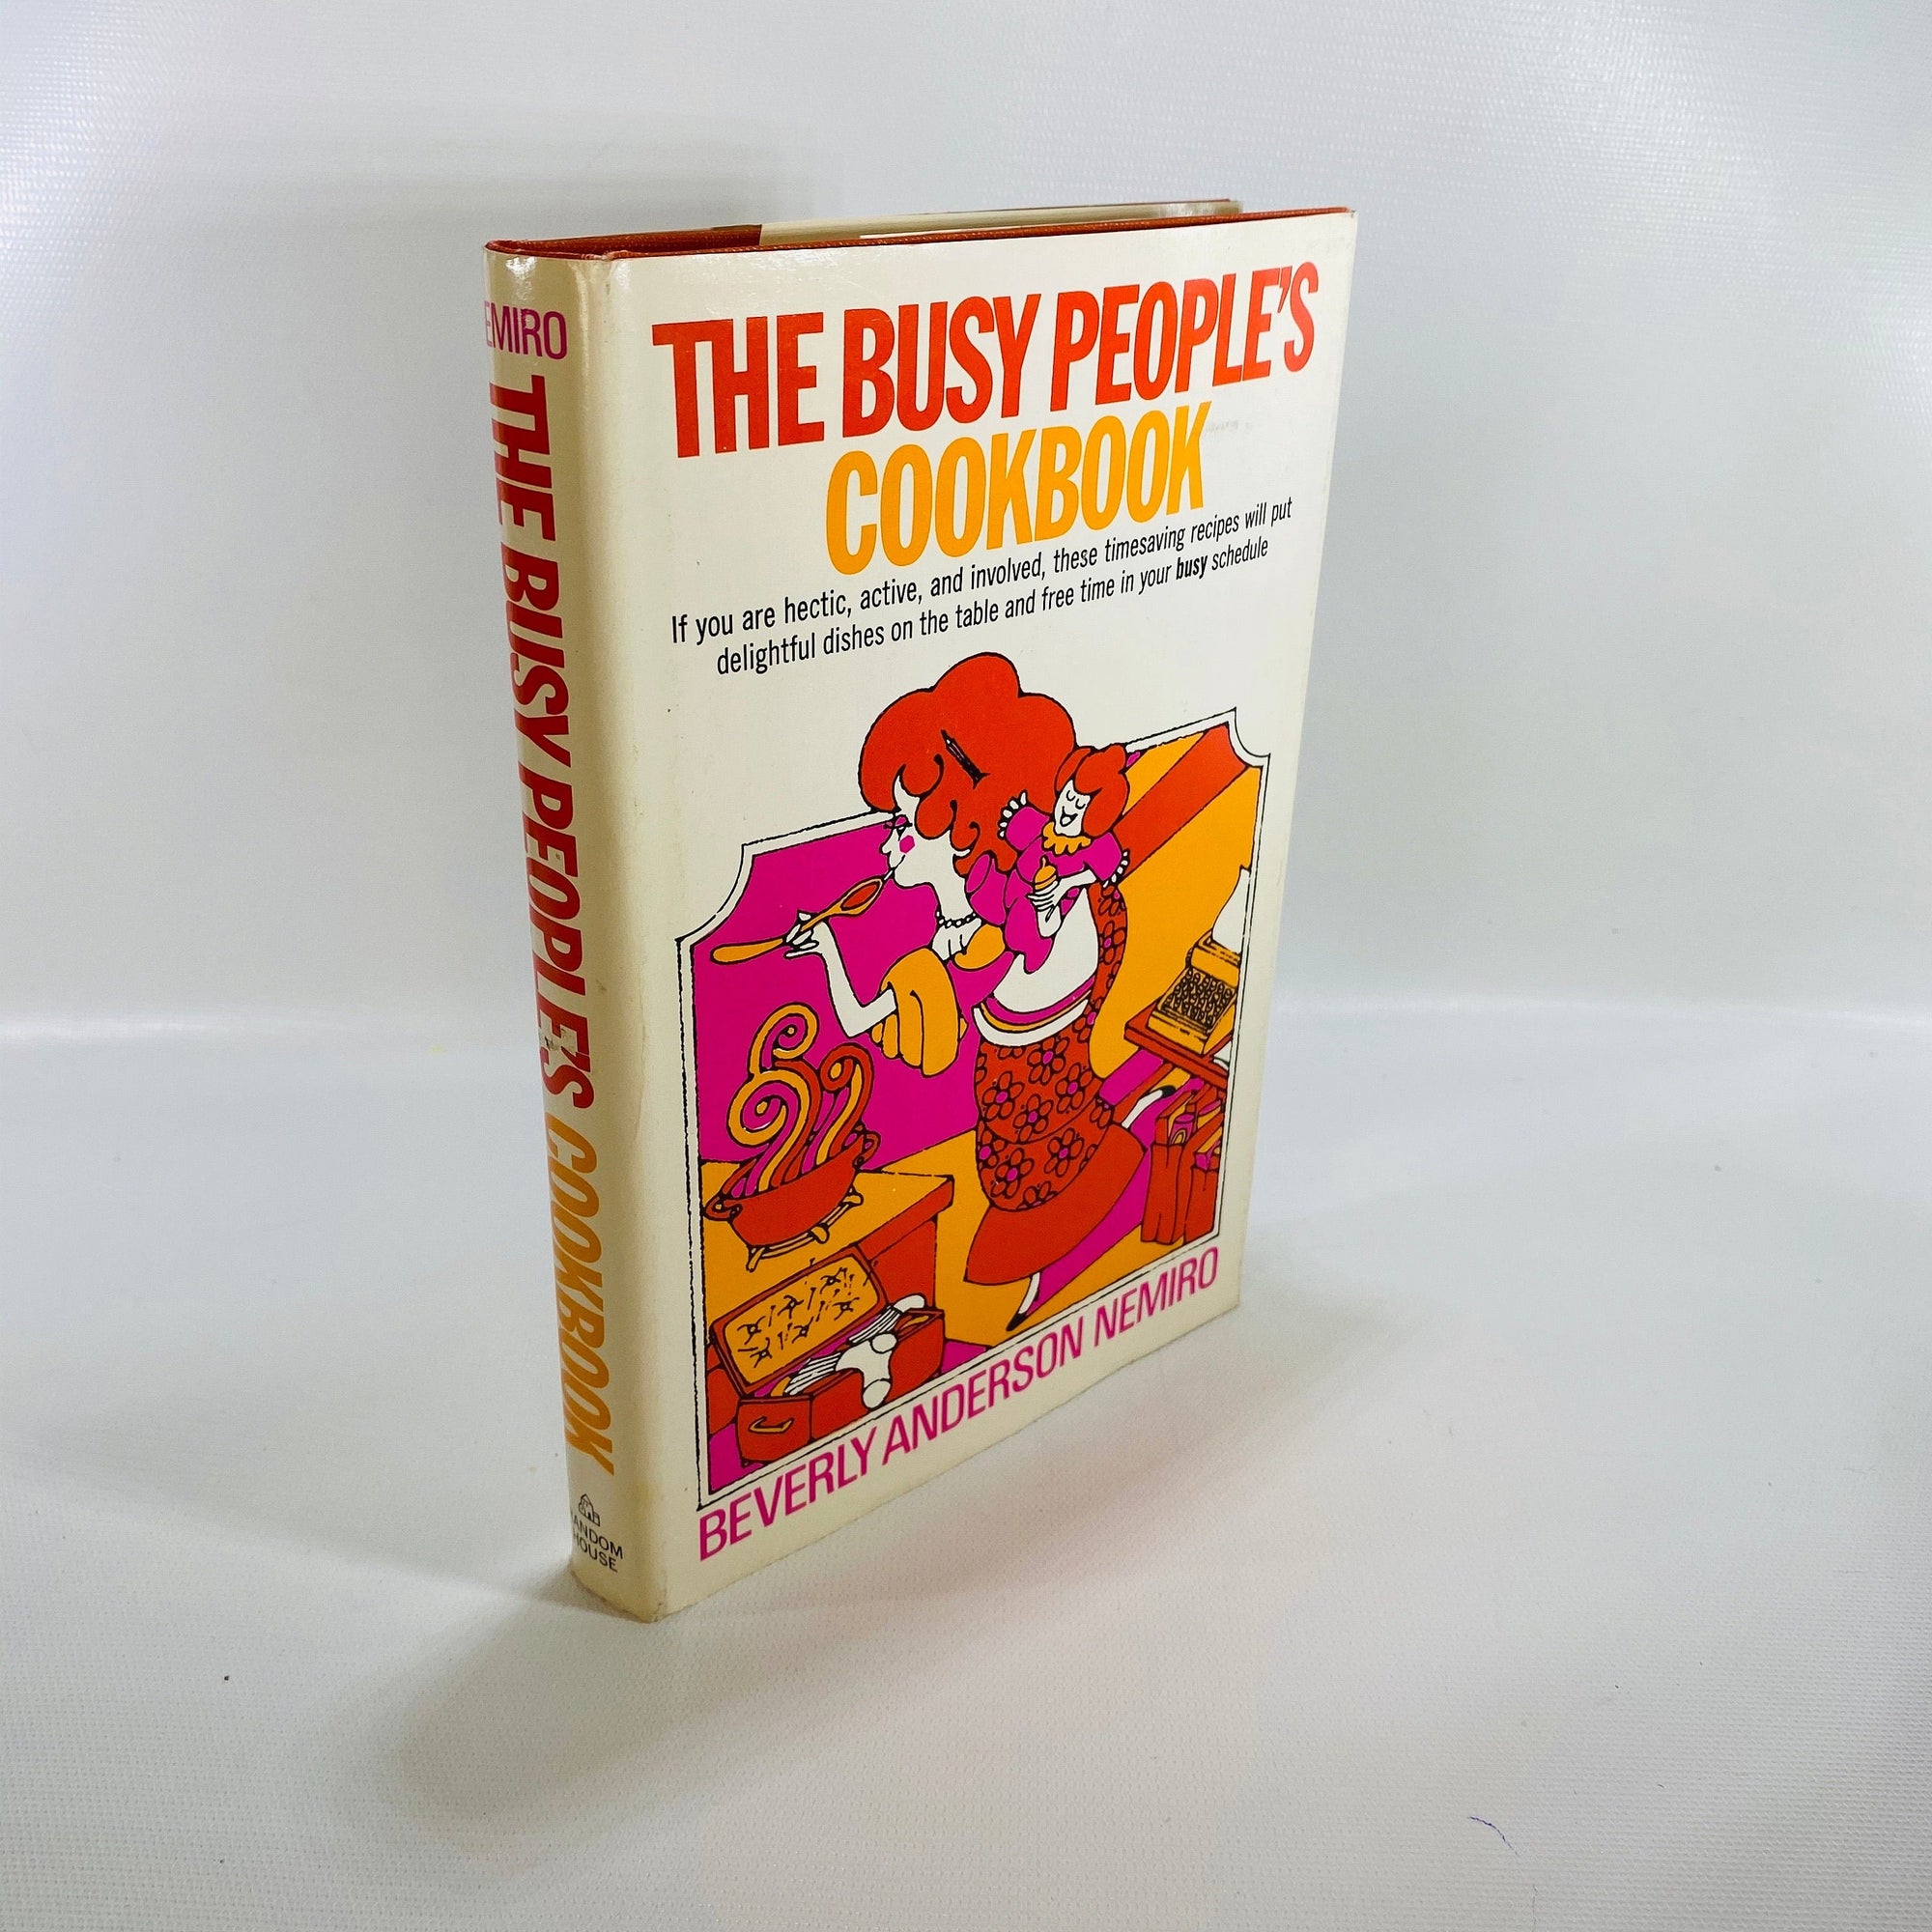 The Busy People's Cookbook by Beverly Anderson Nemiro 1971  Vintage Cookbook